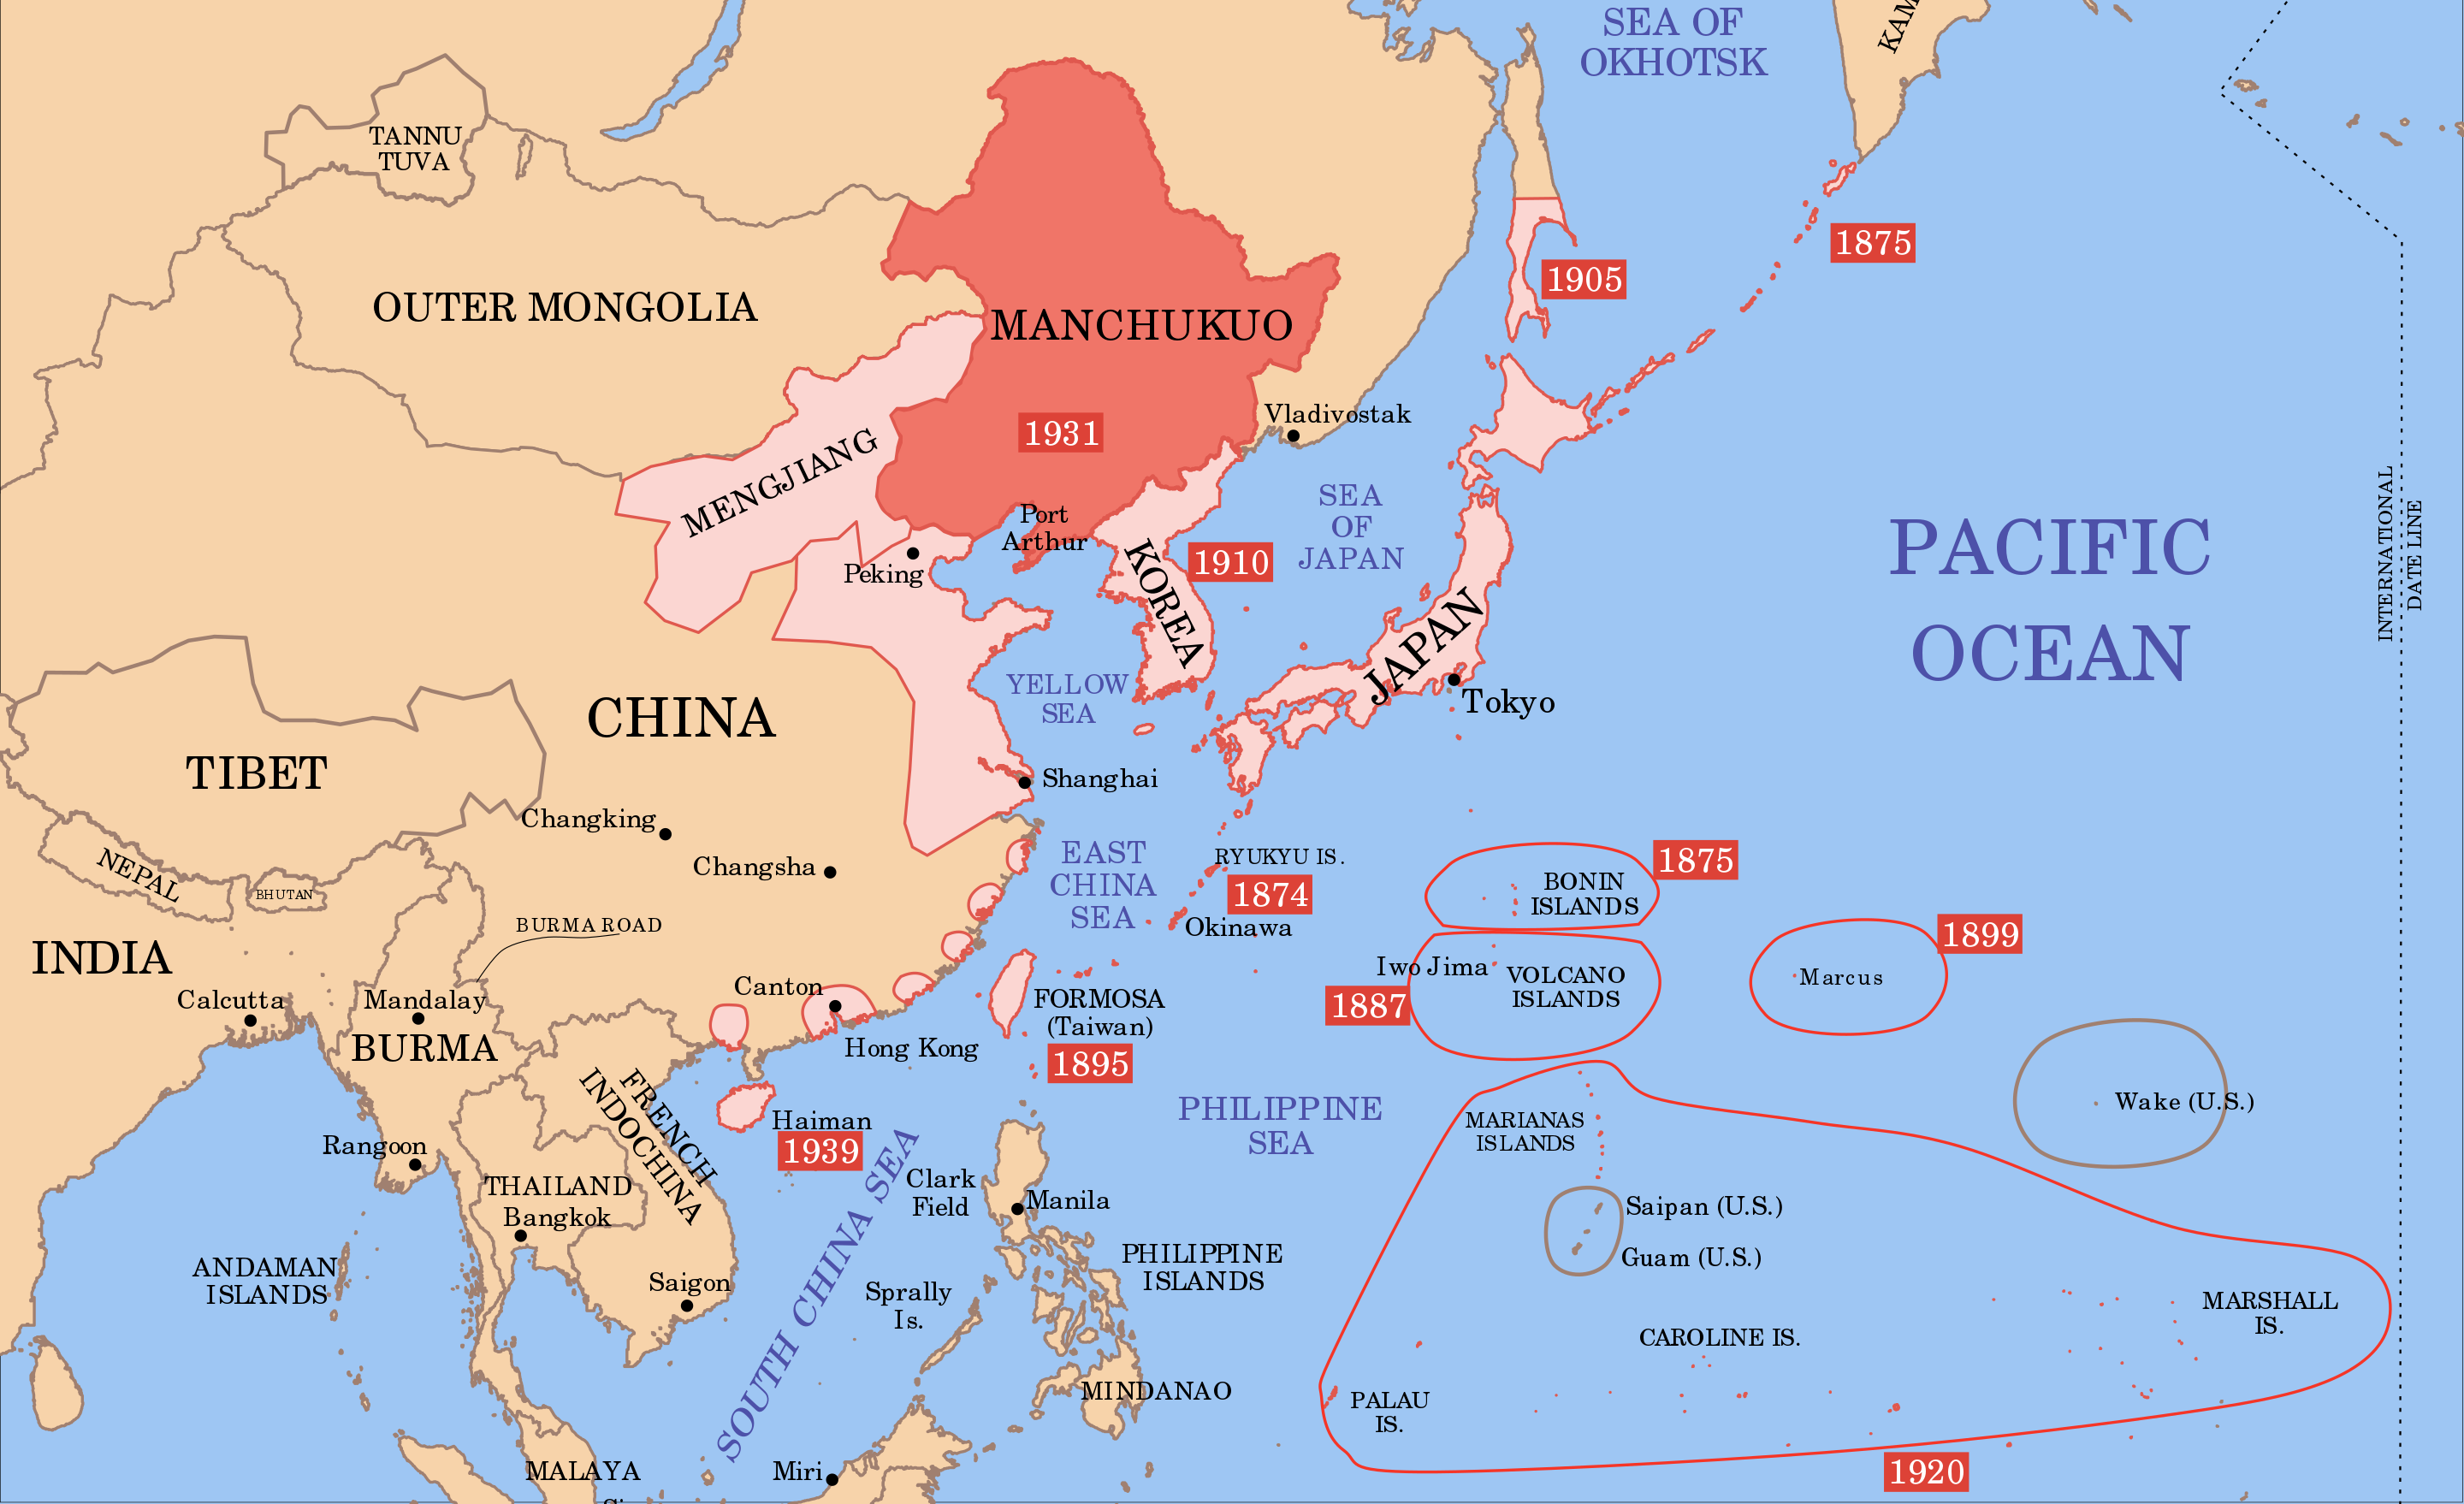 Japanese controlled territory